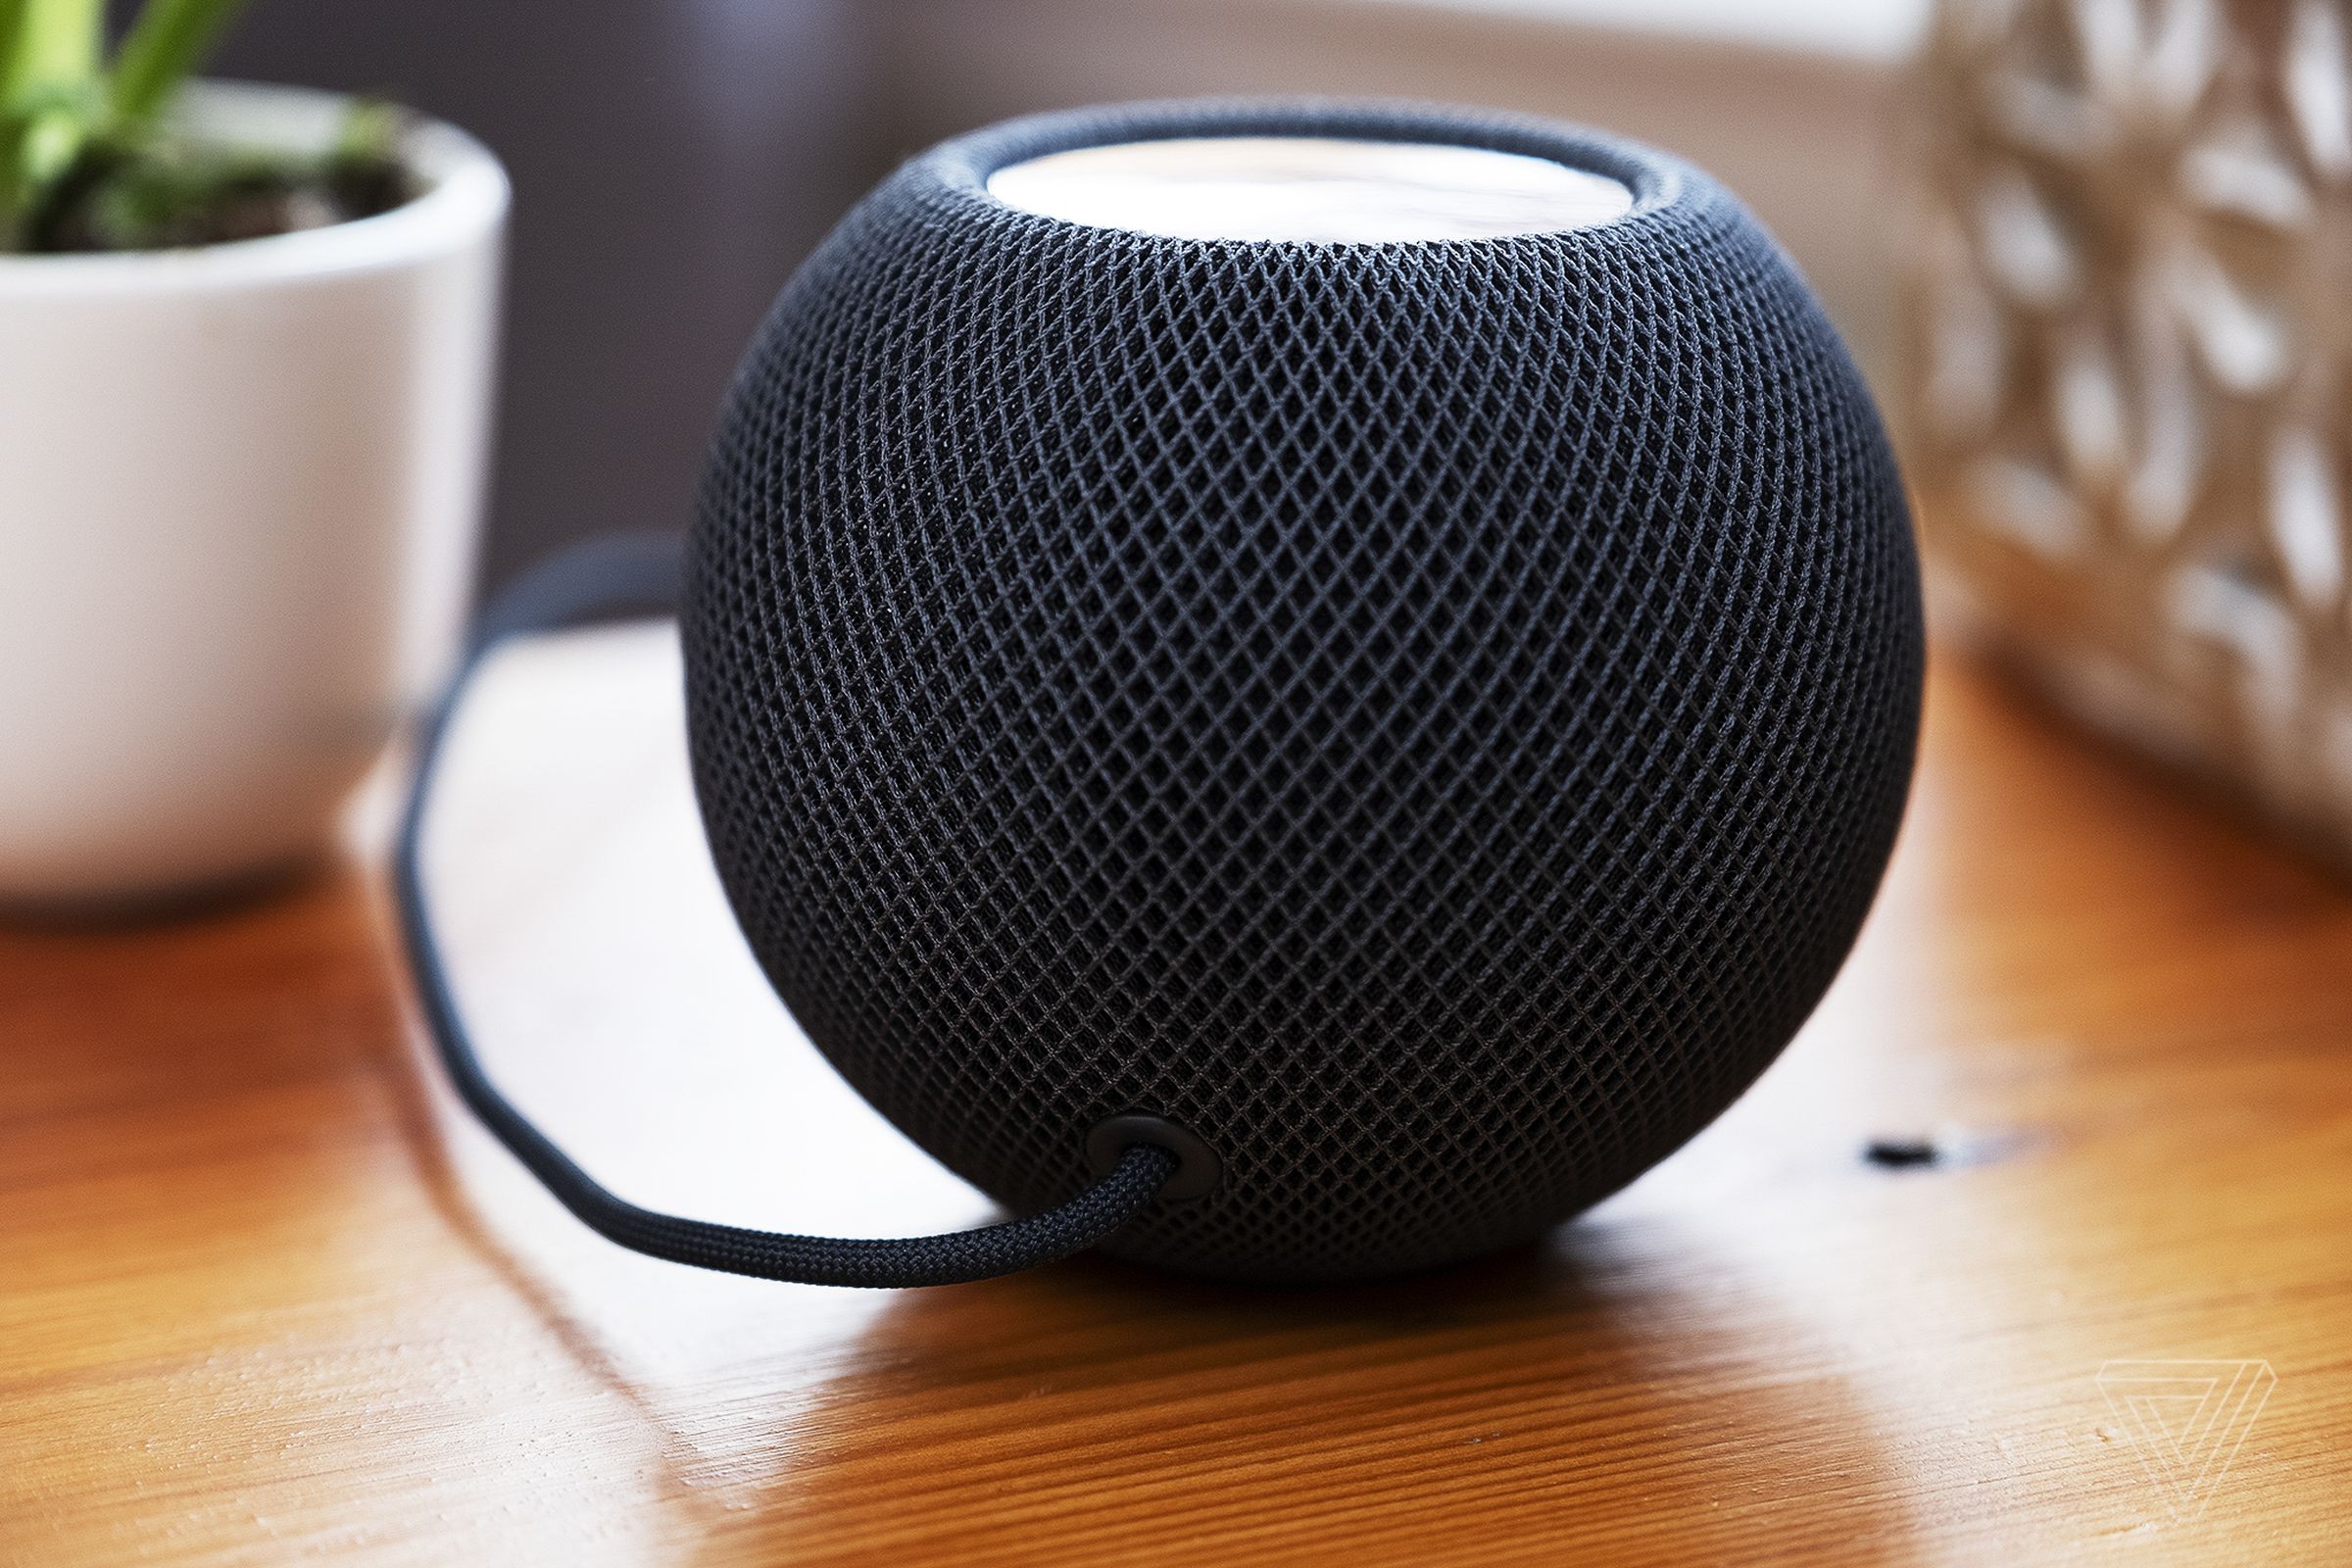 The USB-C power cable is permanently attached to the HomePod mini.